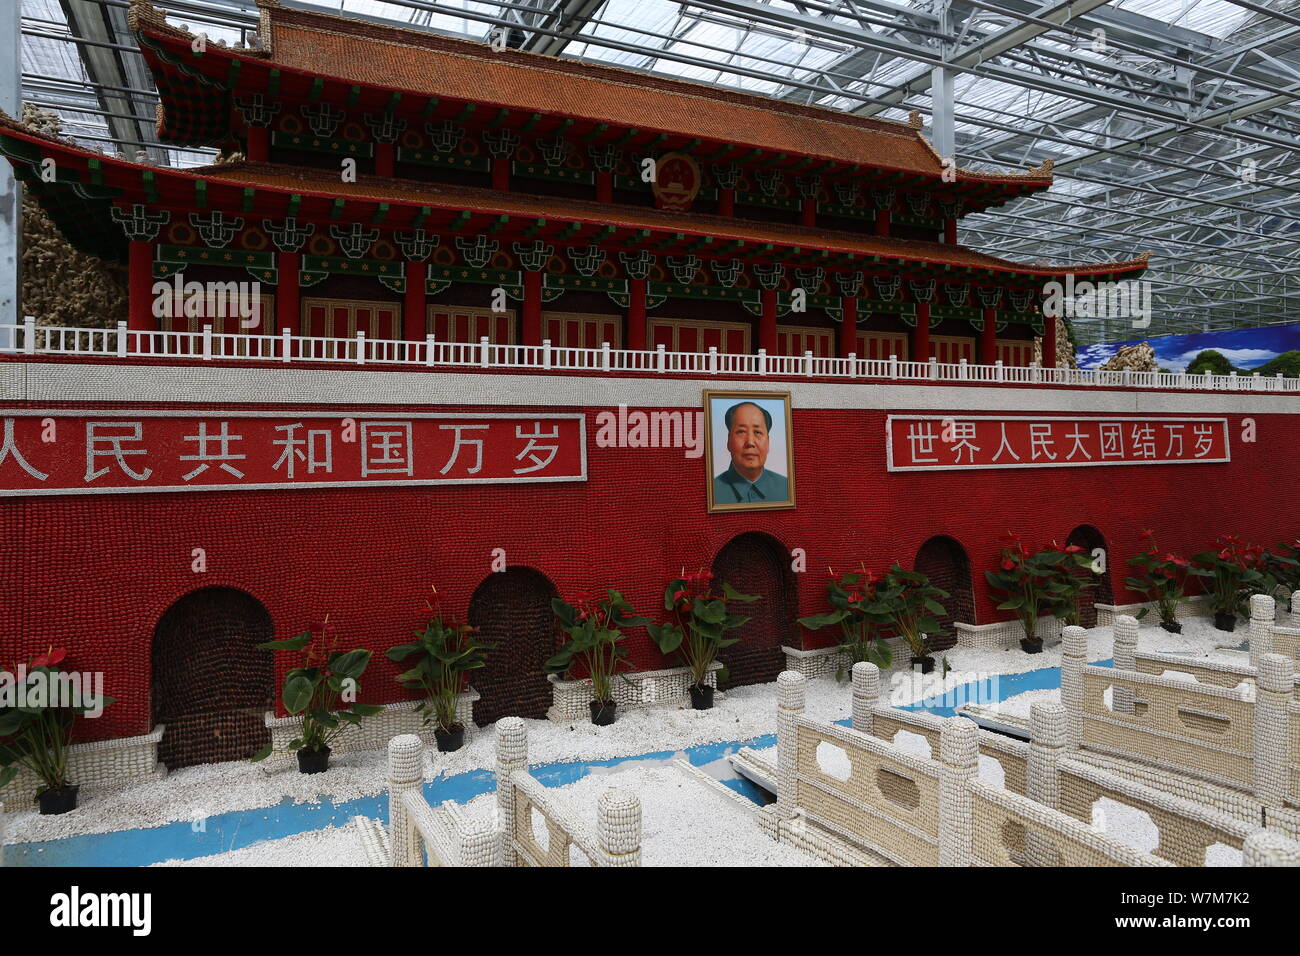 An artwork featuring the shape of Tian'anmen Rostrum made of crops is on display for the upcoming 16th China Changchun International Agricultural and Stock Photo